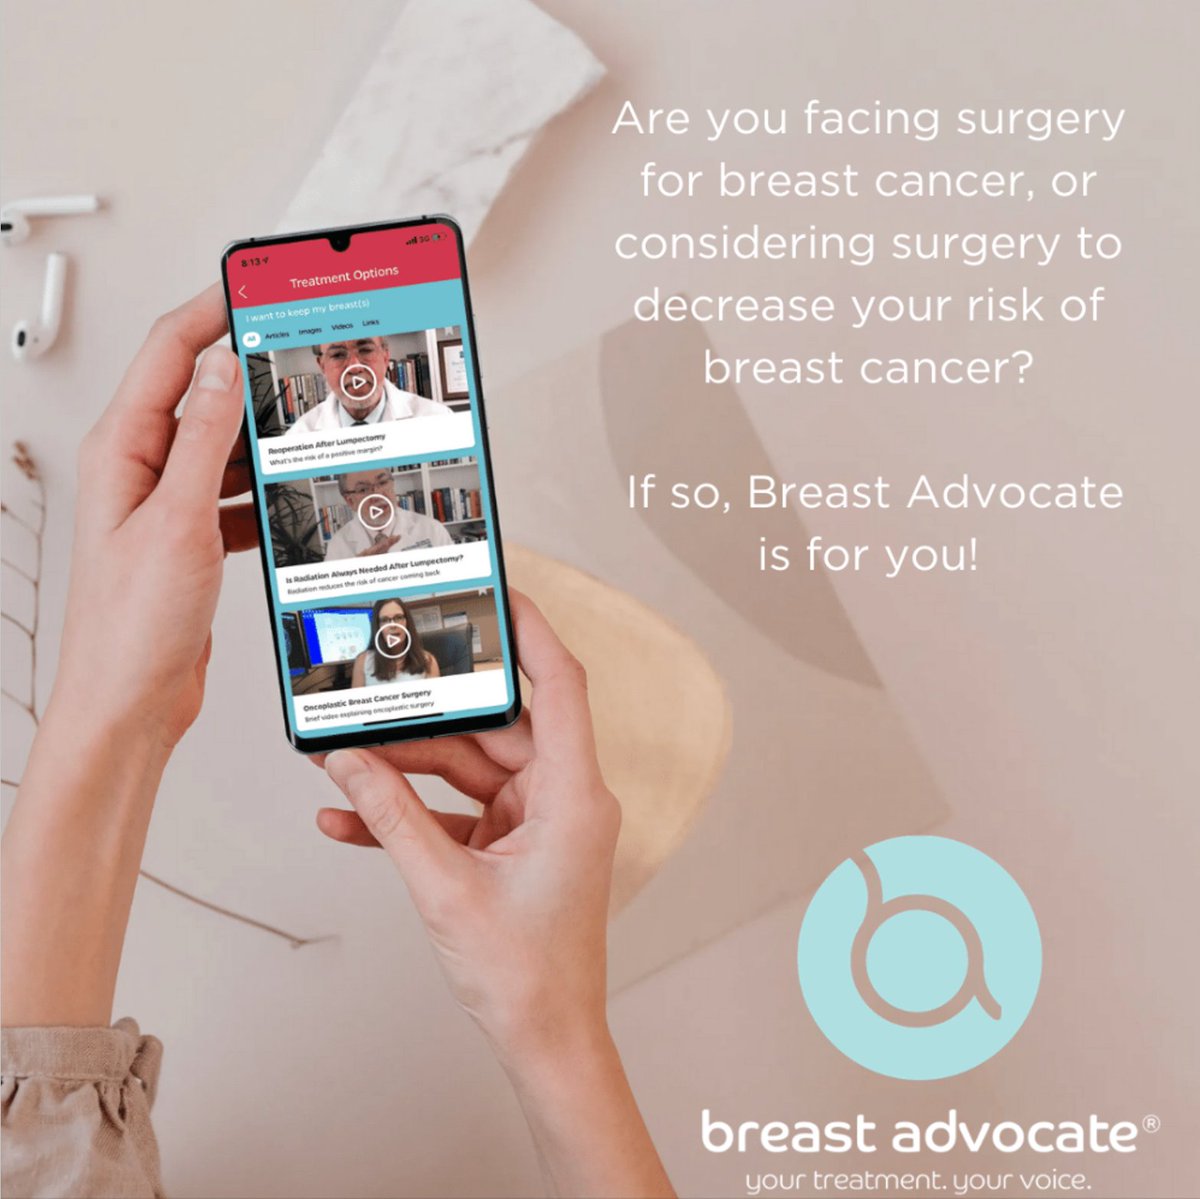 📸#BreastAdvocate #Repost

Take charge of your own health and care. Download today!  linktr.ee/BreastAdvocate…

#breastsurgeons #drminaschrystopoulo #prma #raveday #breastcancersurgery #breastreconstruction #mastectomy #previvors #bravecoalition #healbetter #RCPcare